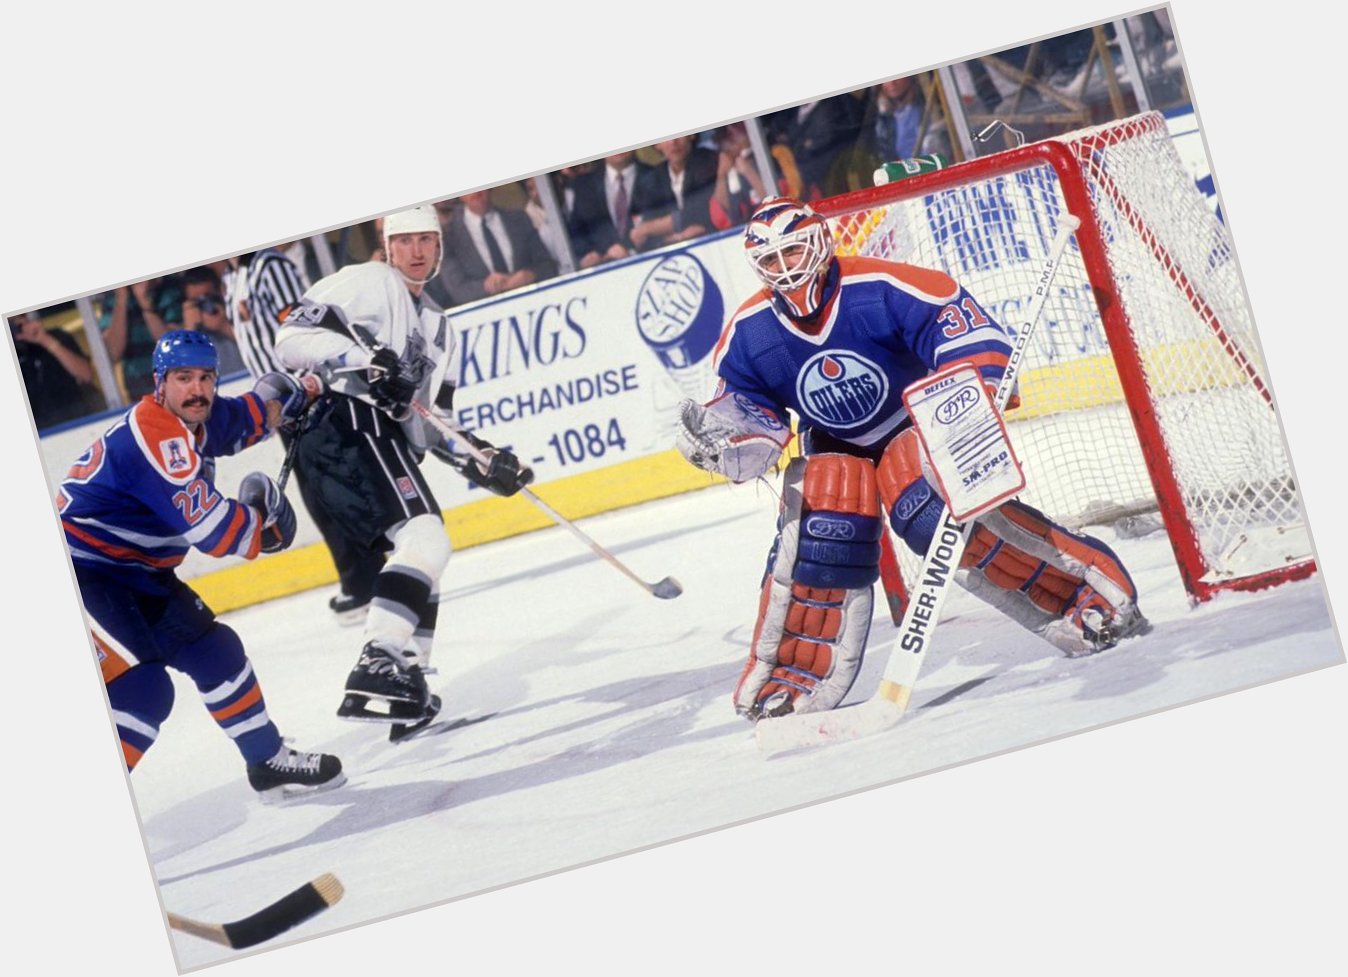 A happy birthday goes out to 54 year old former Canadian Oilers goaltender Grant Fuhr! 